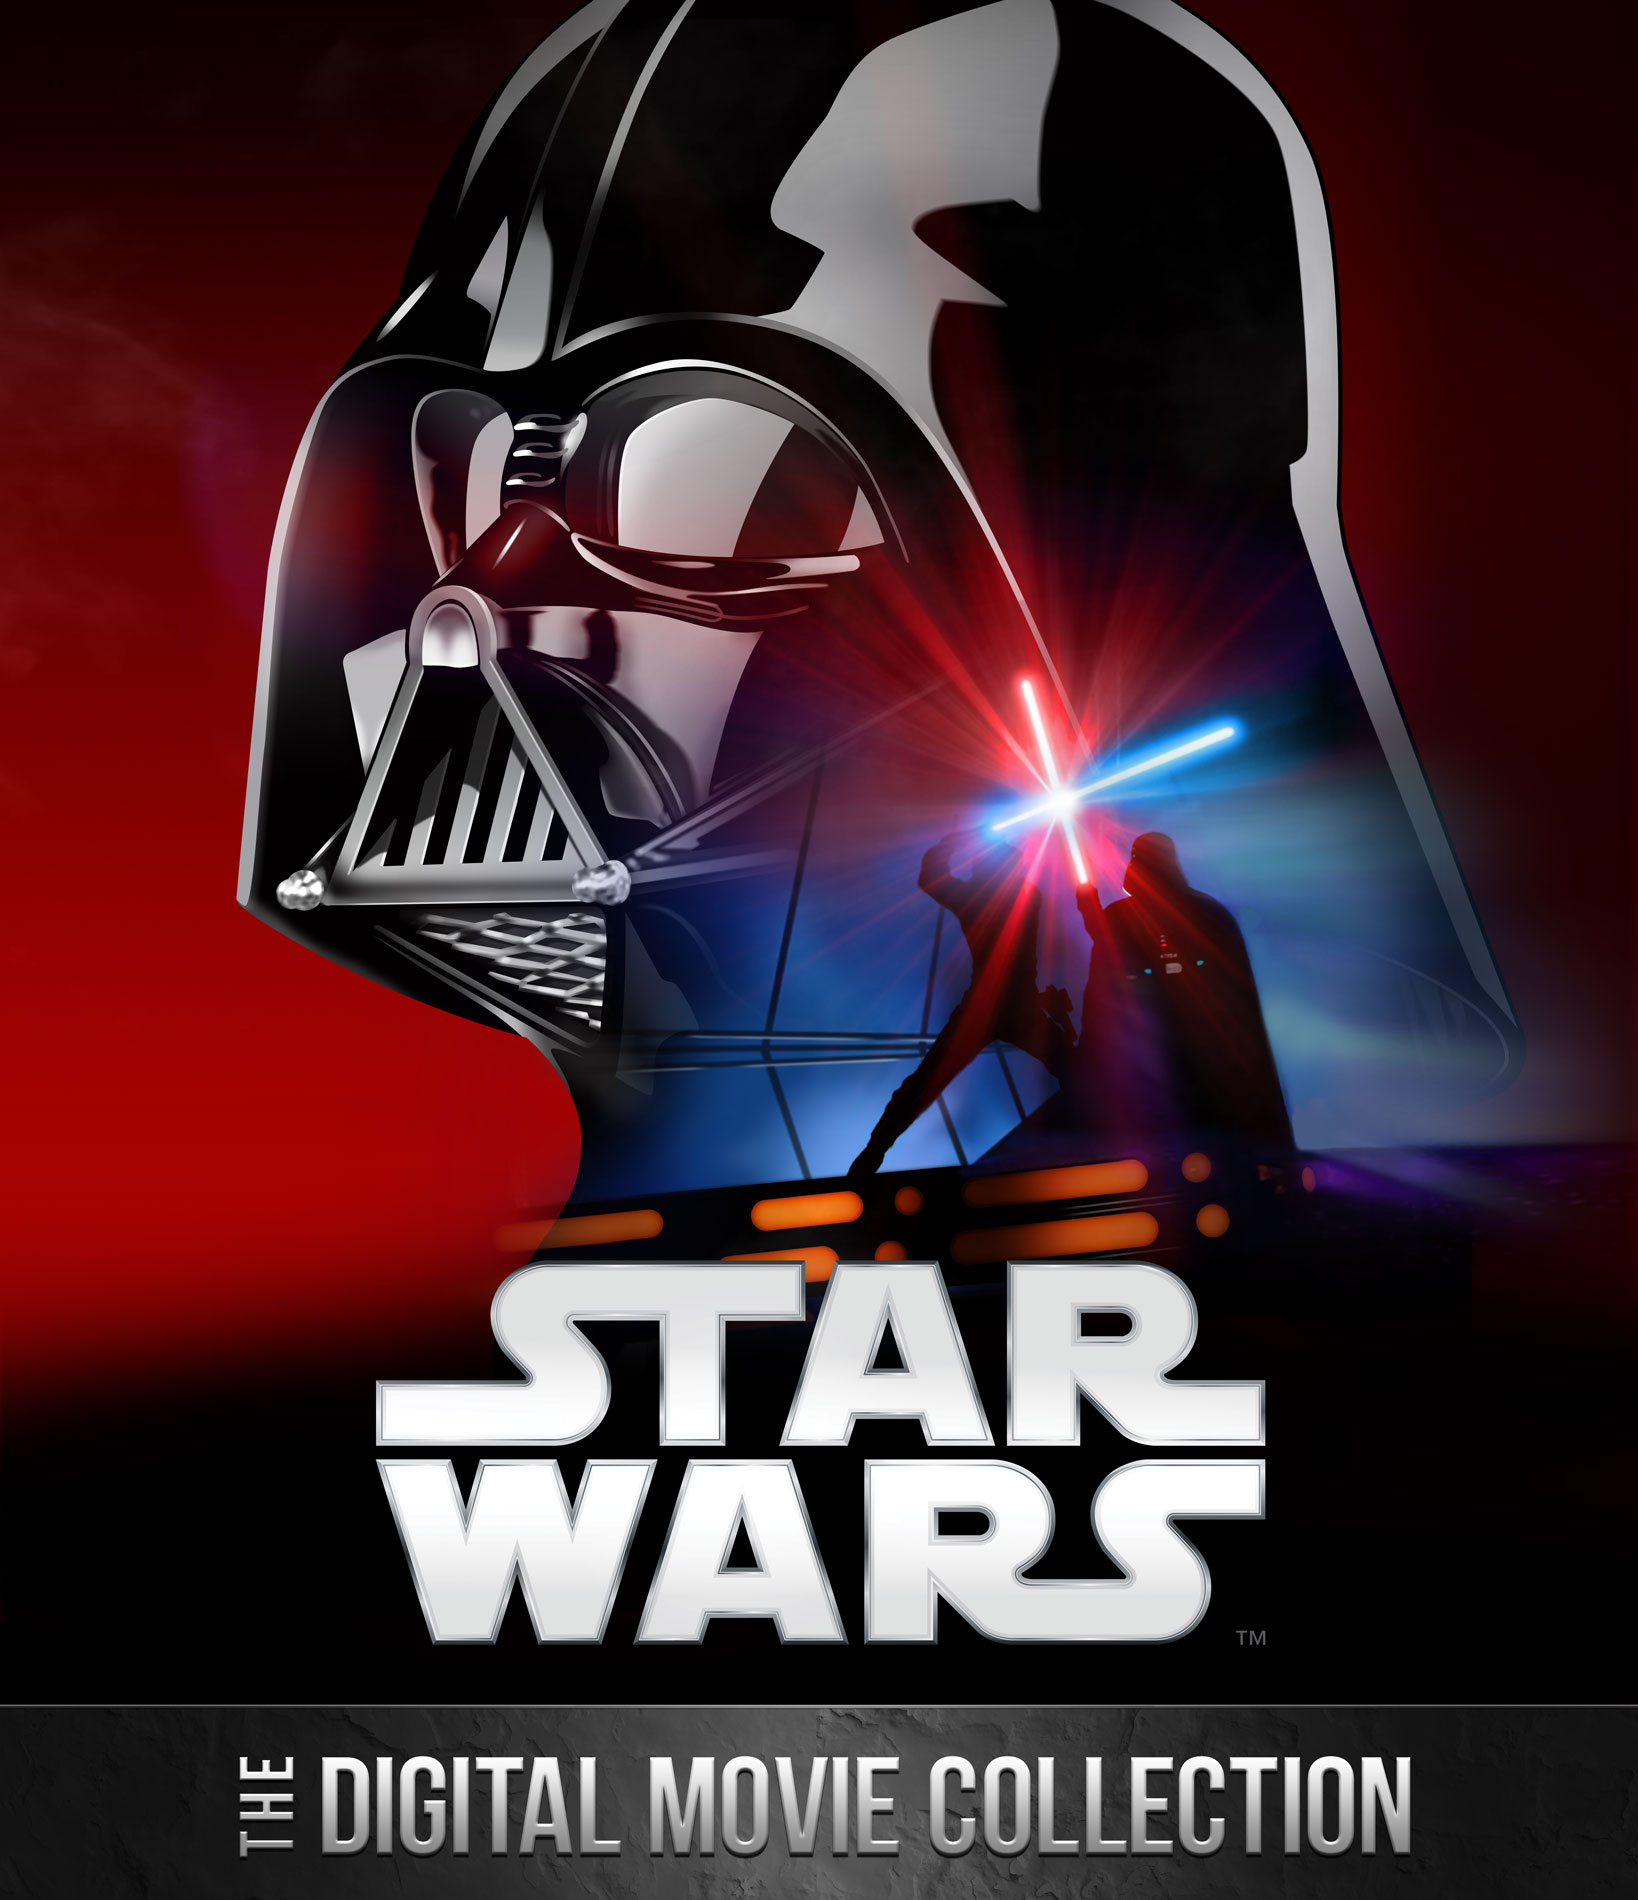 Star Wars: The Digital Movie Collection - Pros and Cons